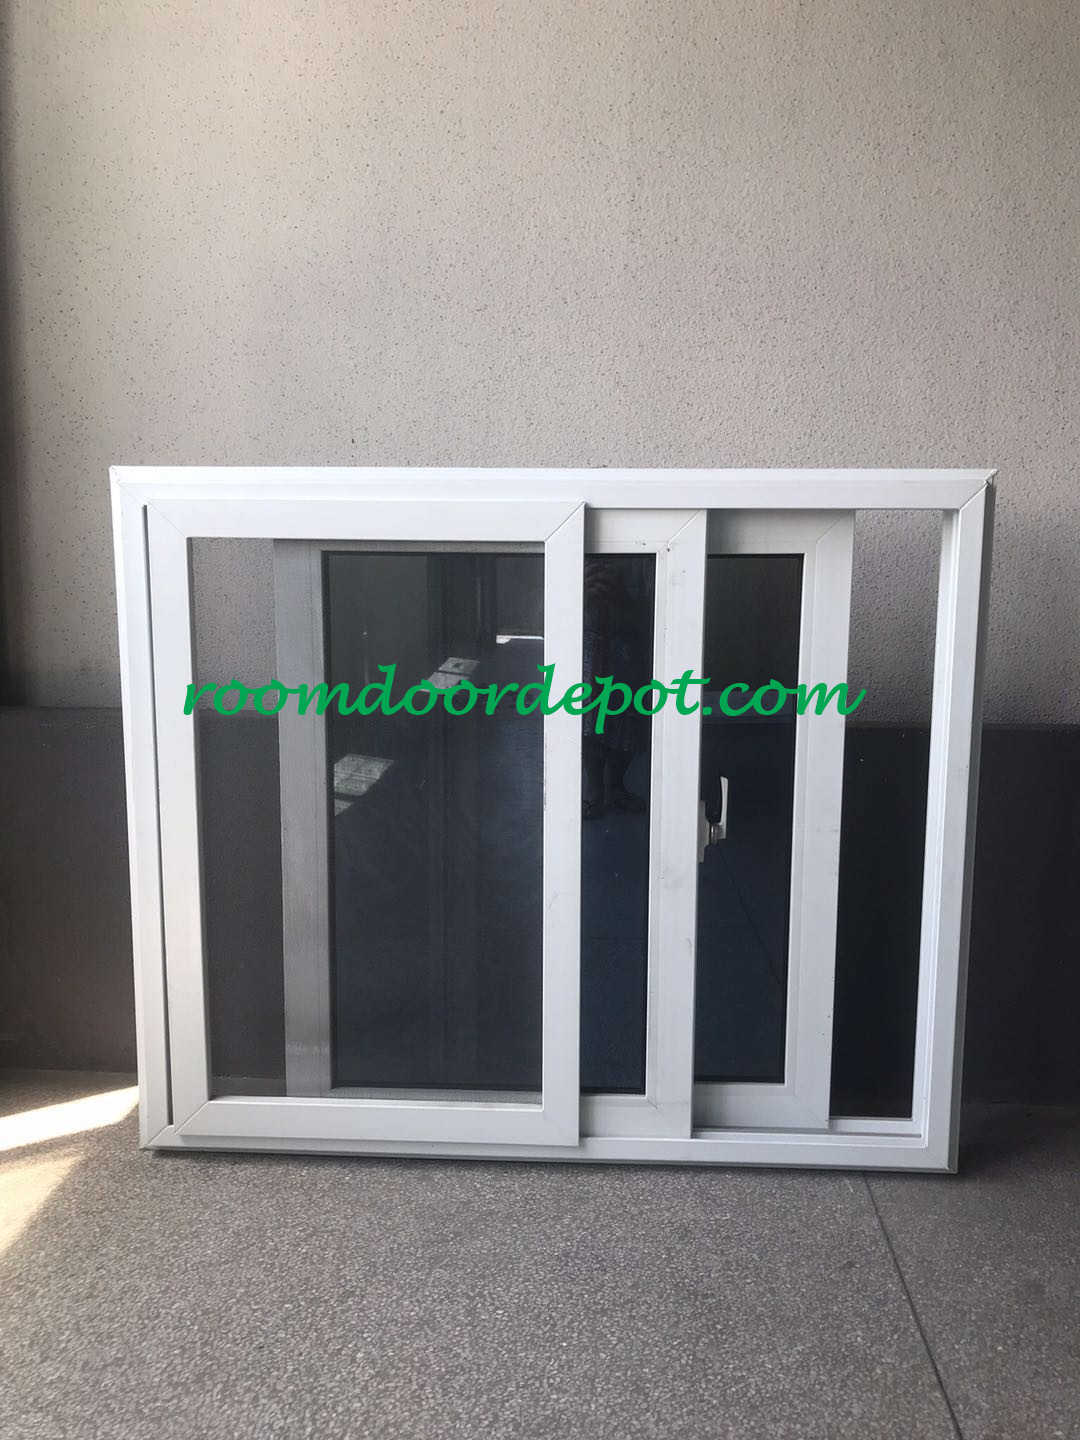 Hot sale upvc slide windows with grill design for south america market